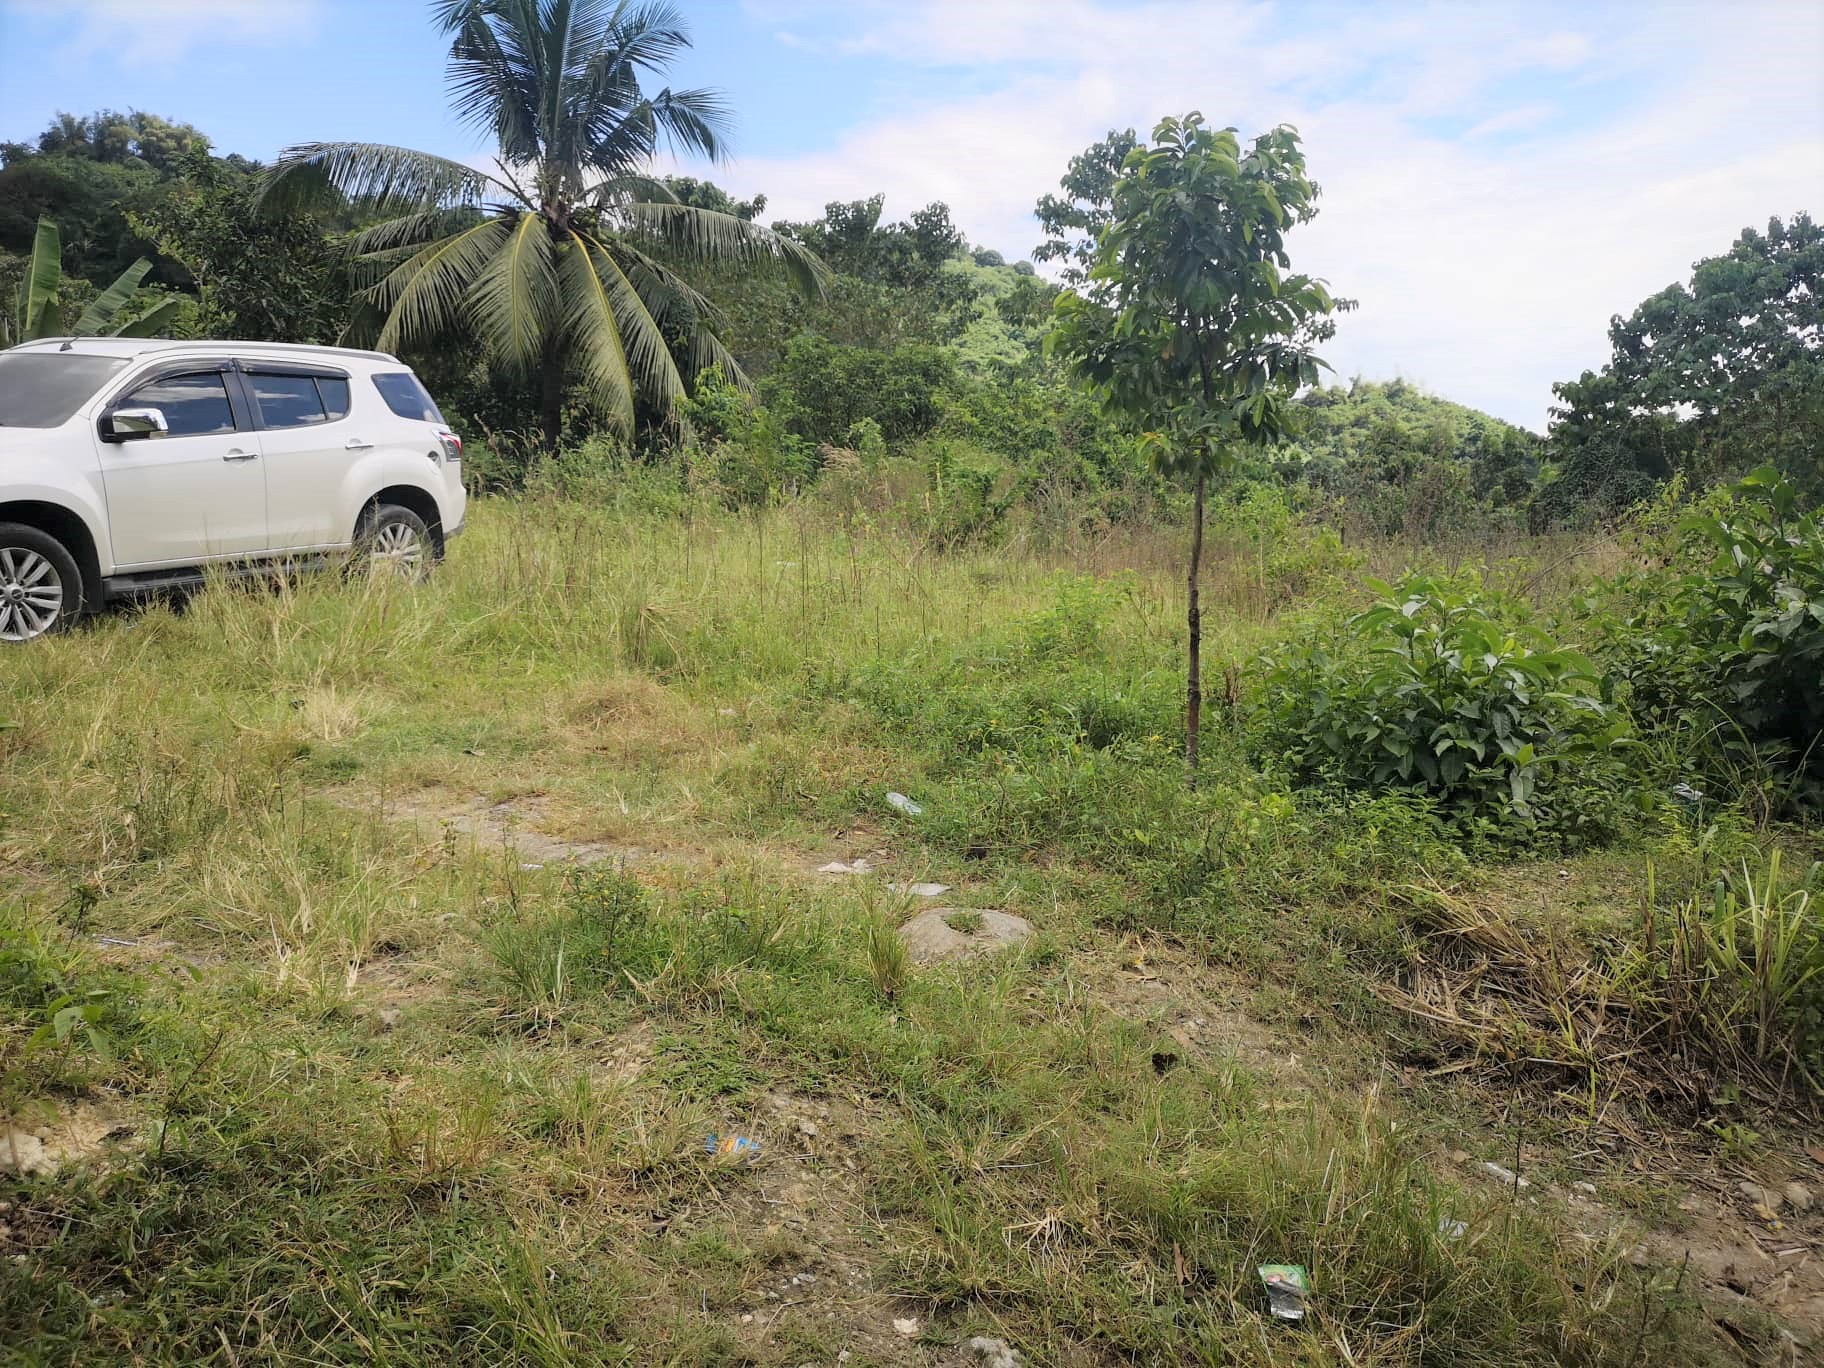 Overlooking lot for sale Talamban Cebu City open for developers